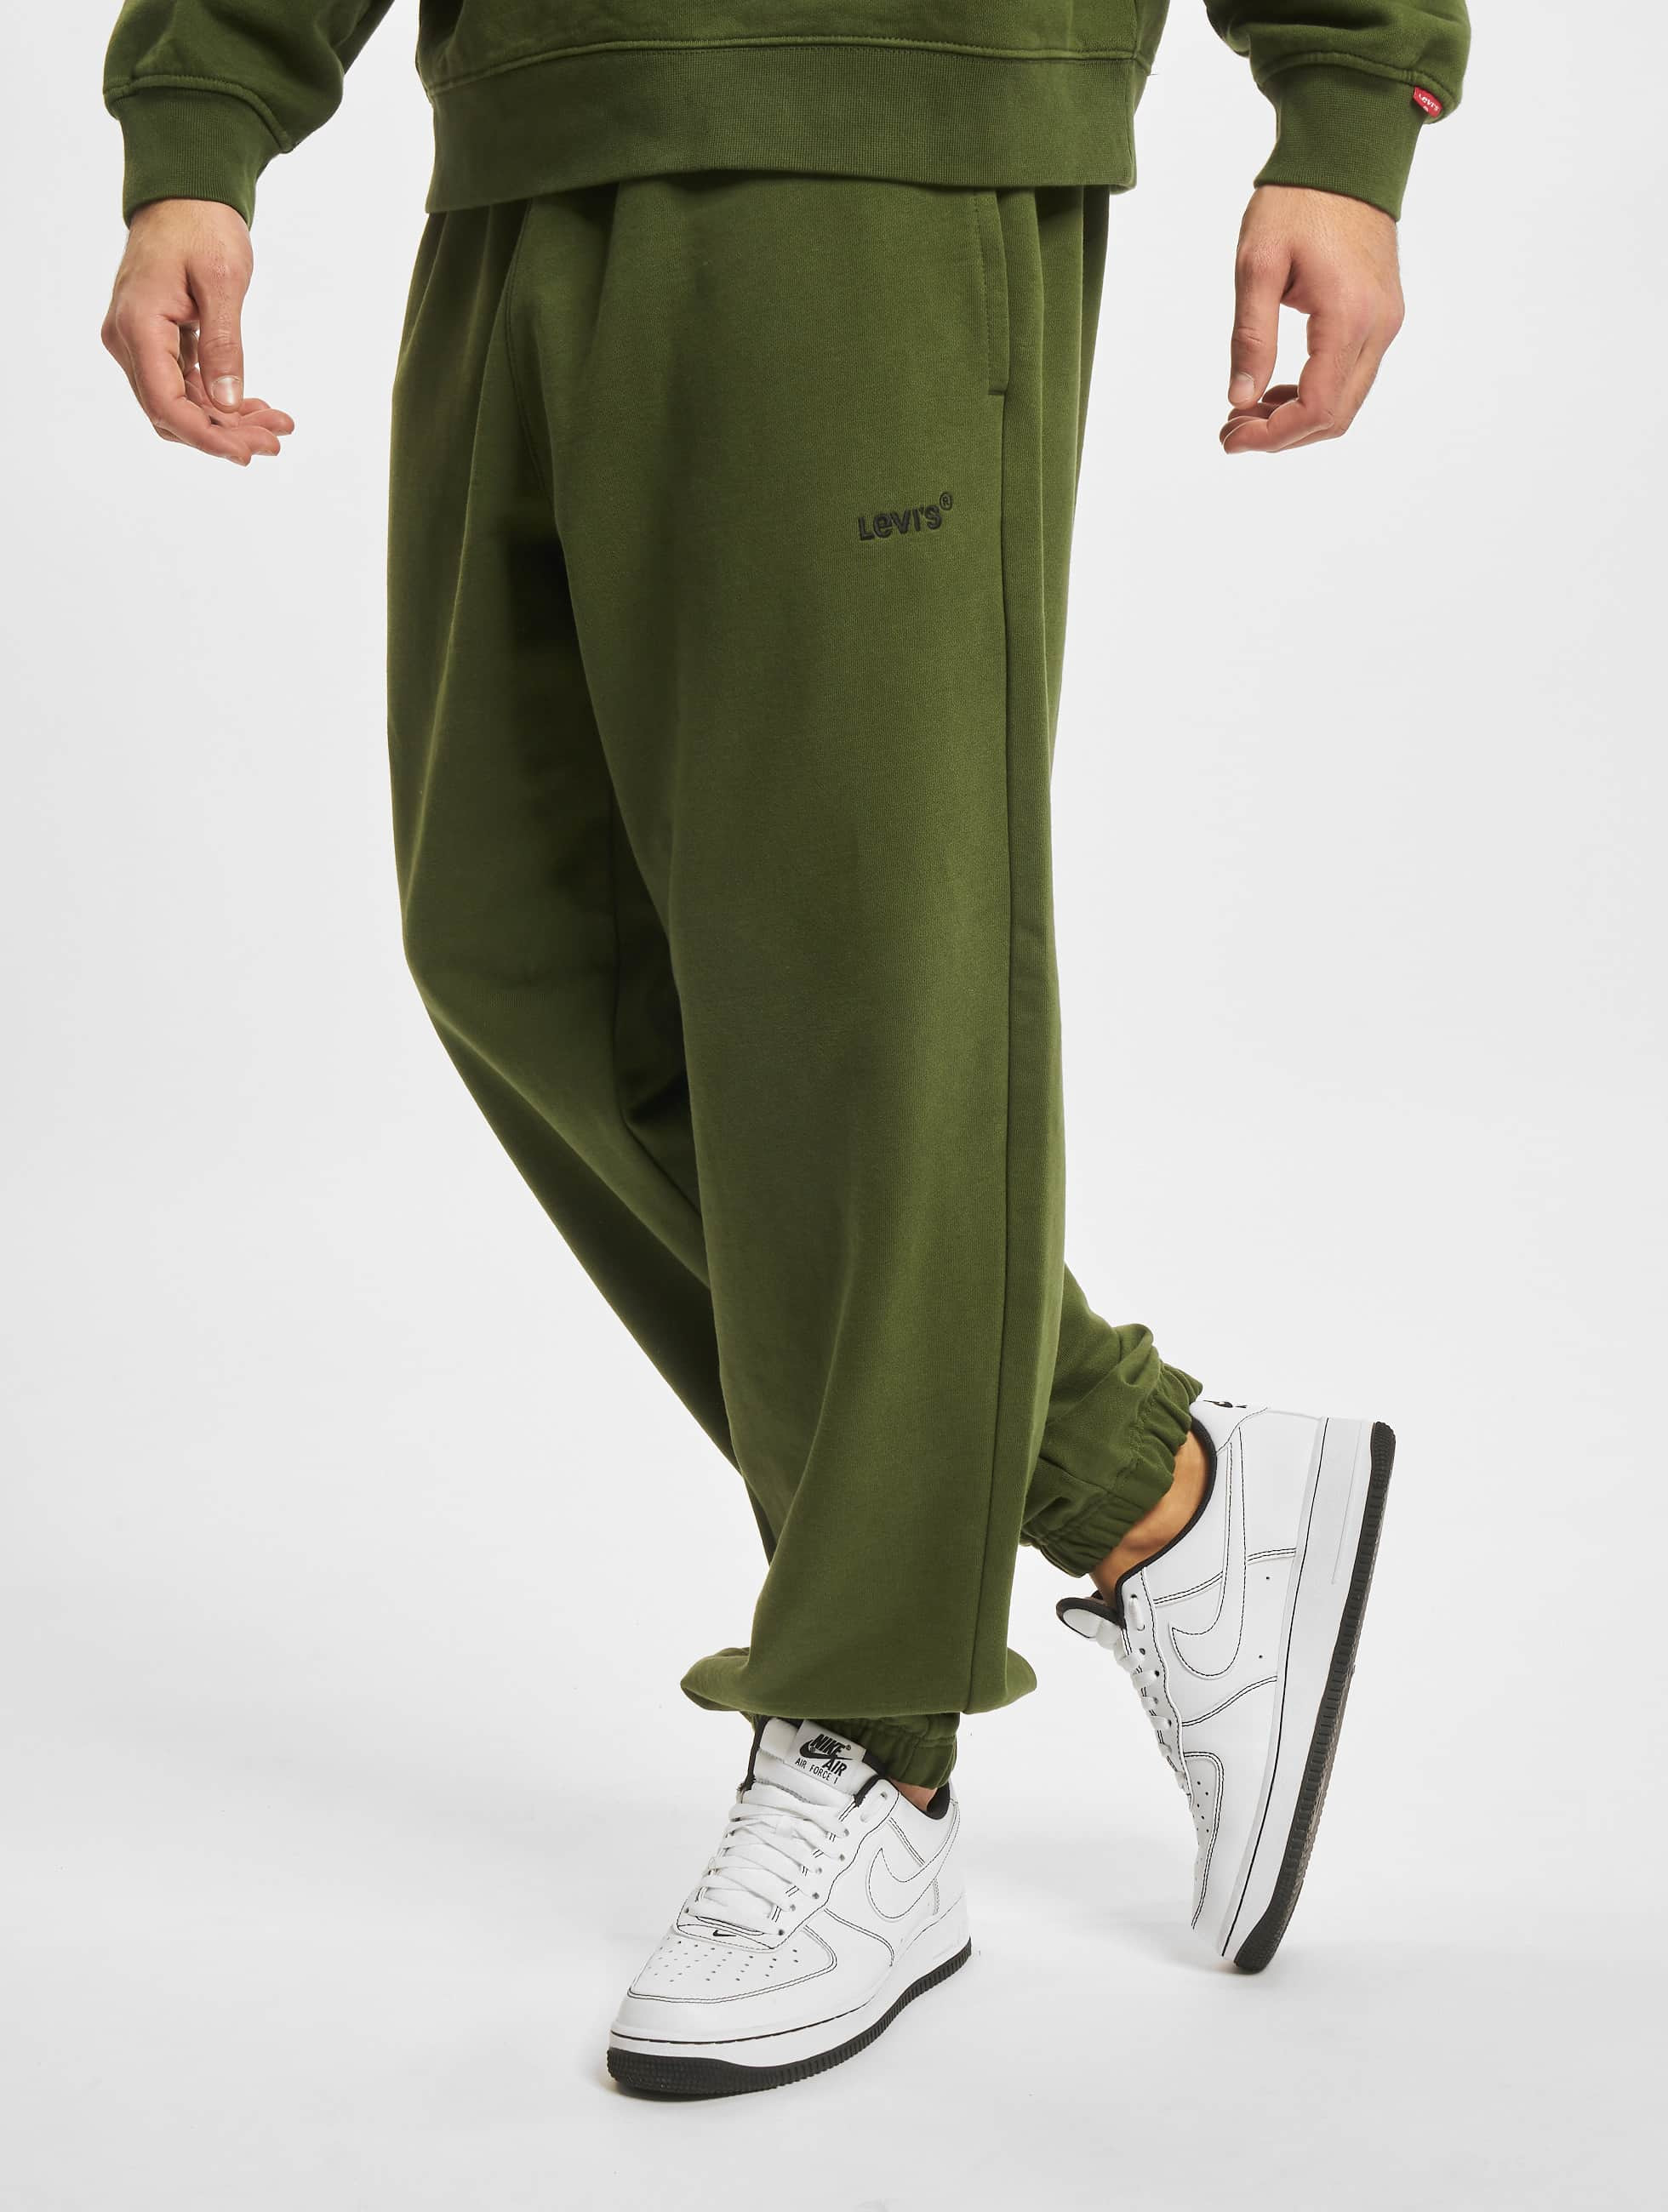 Levi's® Pant / Sweat Pant Red Tab in green 874142